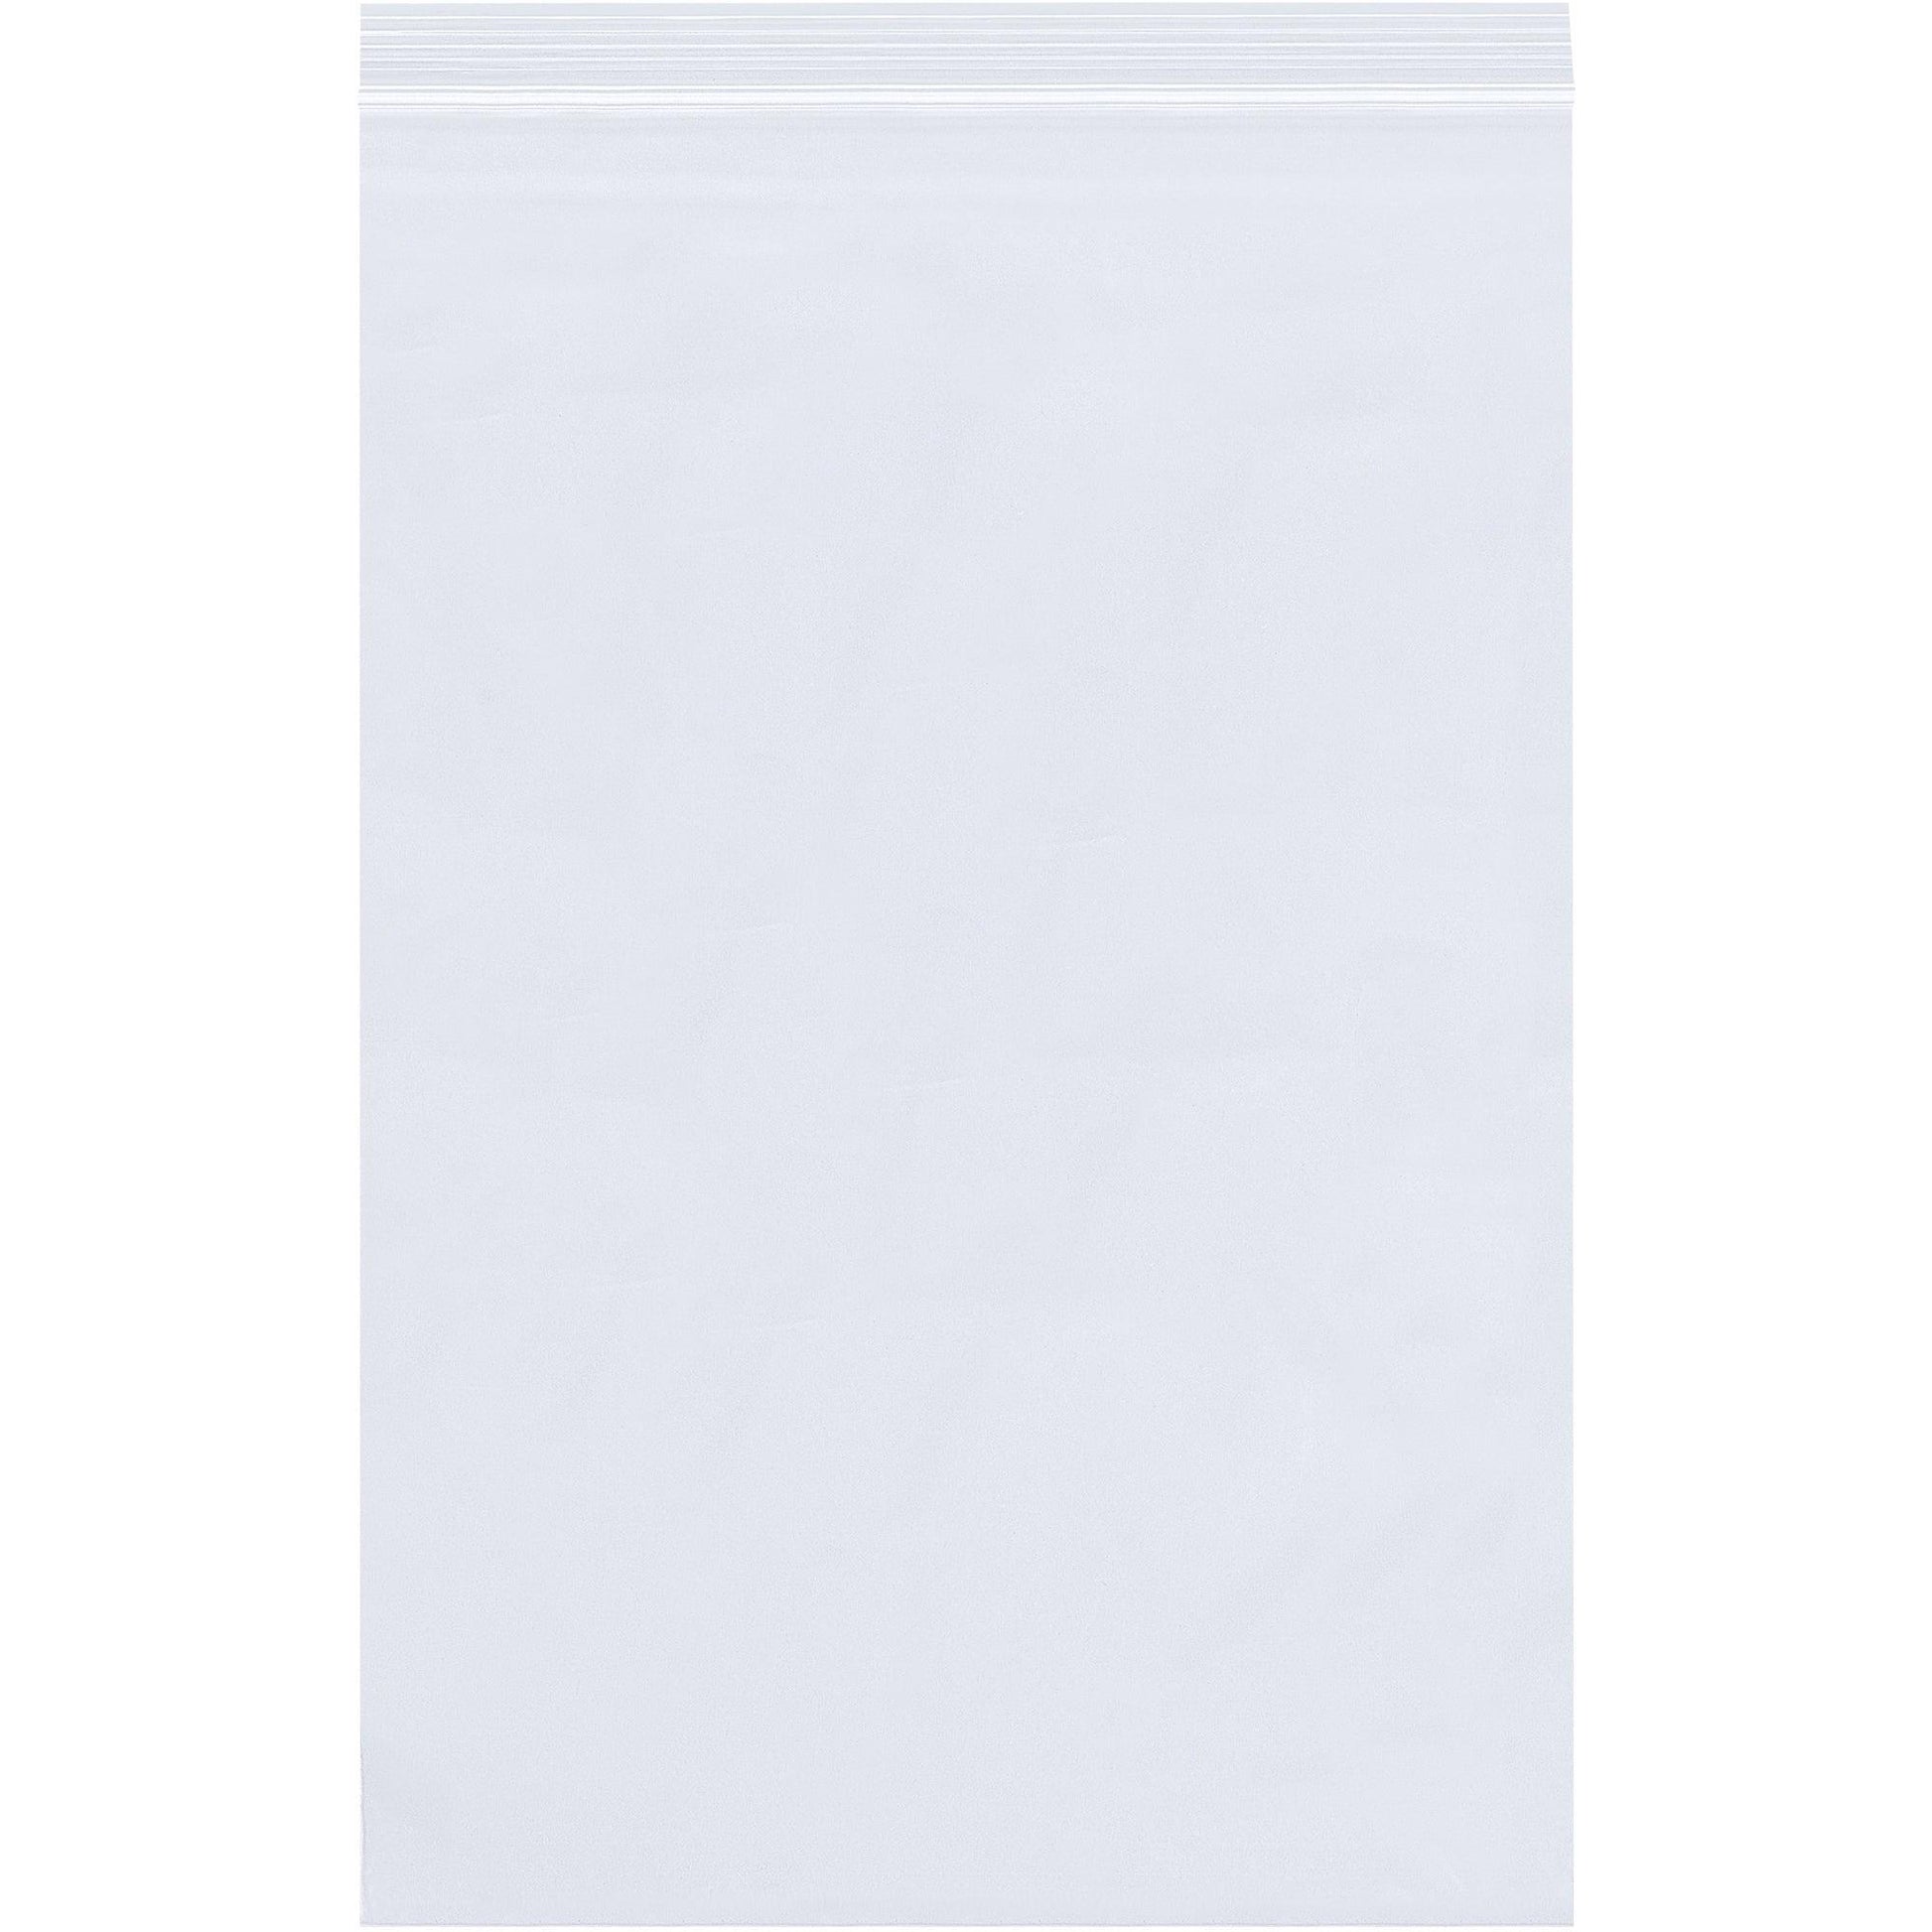 12 x 18" - 8 Mil Reclosable Poly Bags - PB3941